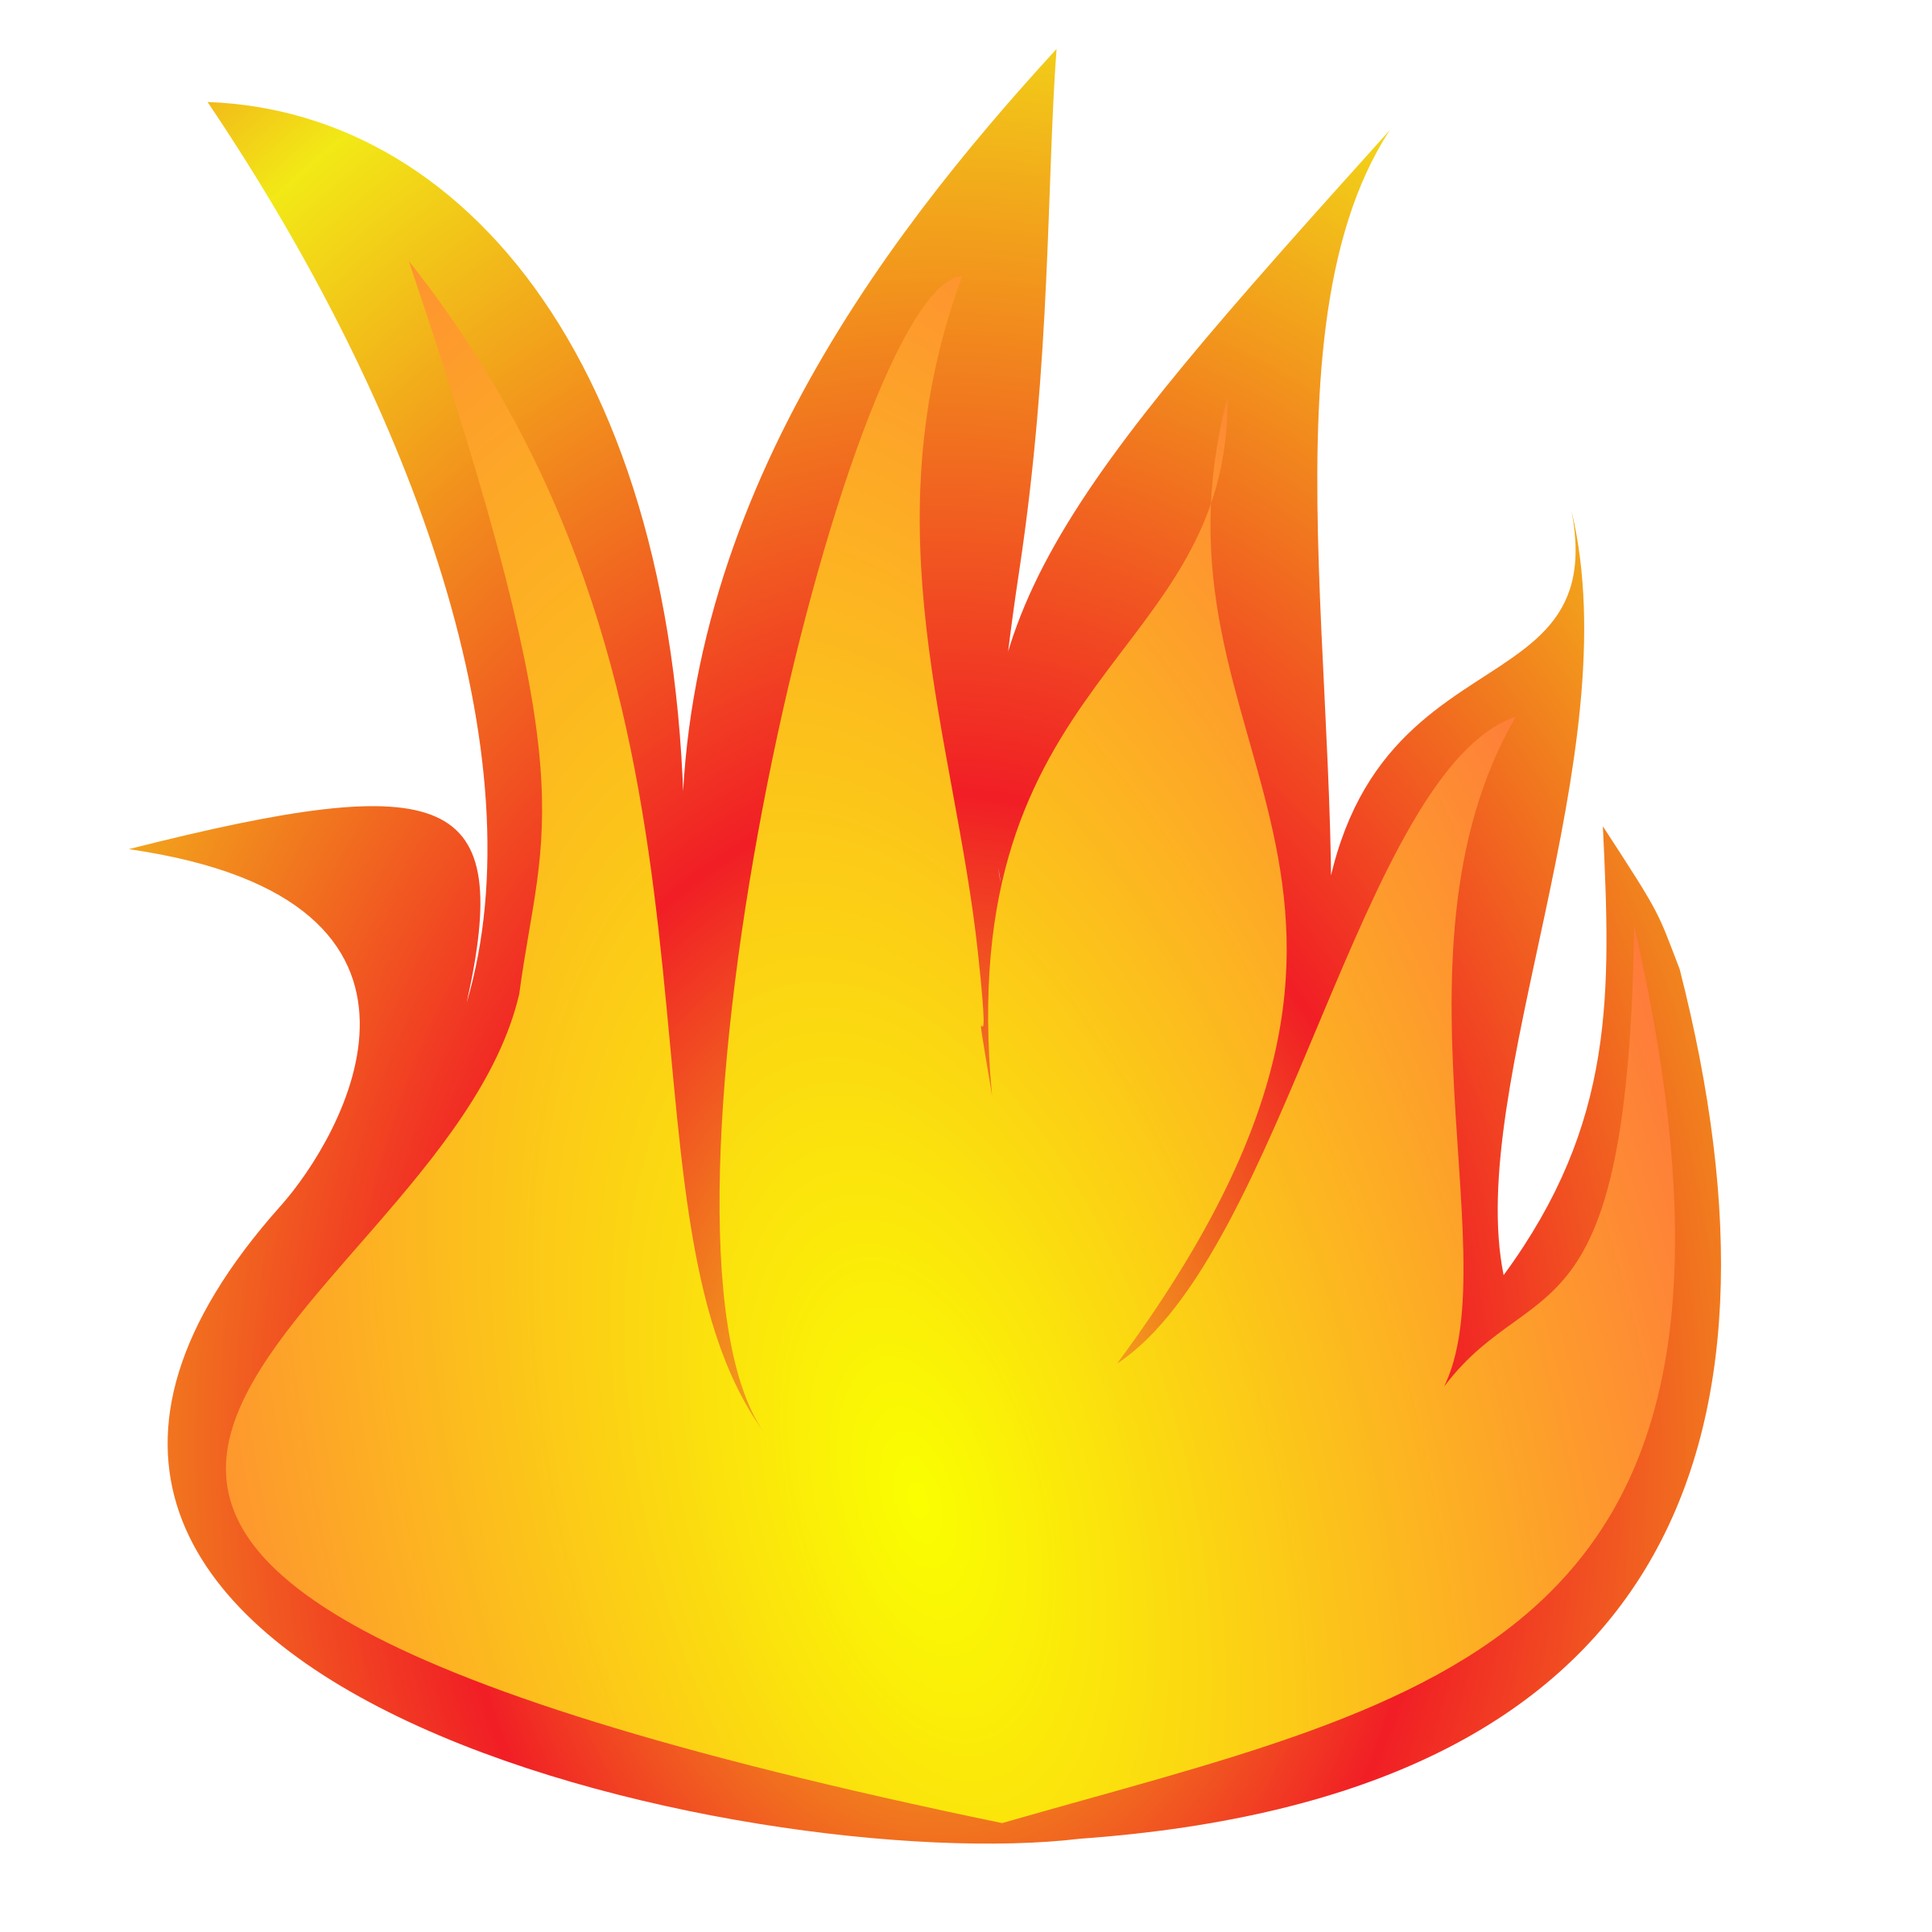 Flame Clipart - 61 cliparts